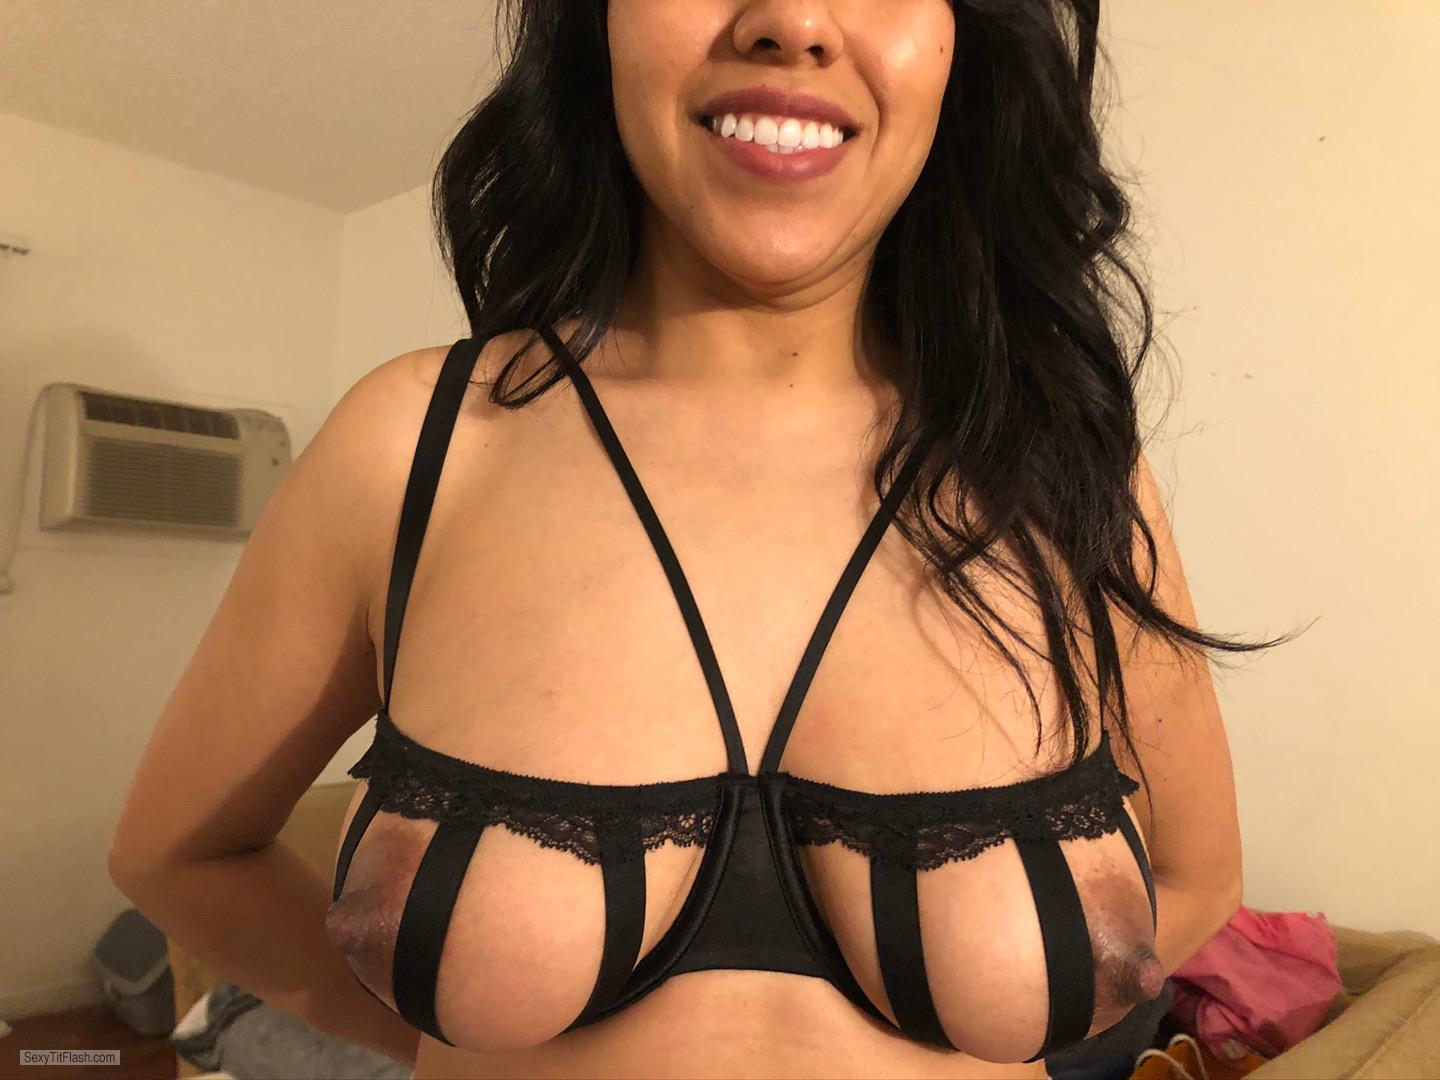 Tit Flash: My Very Small Tits - Alma from United States